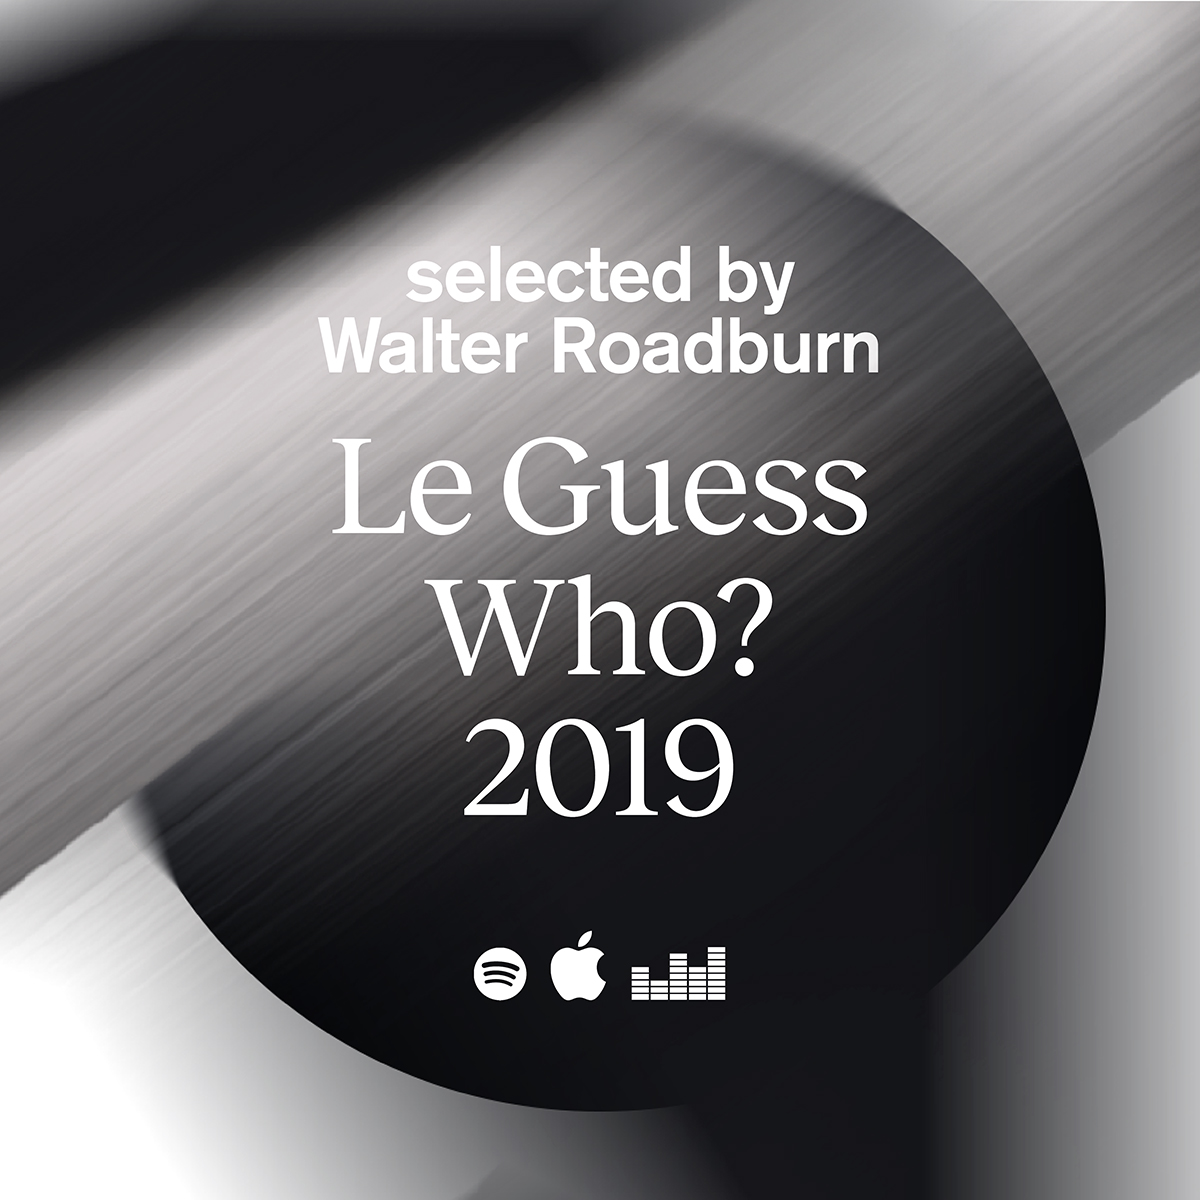 Playlist: Le Guess Who? 2019 selected by Walter Roadburn